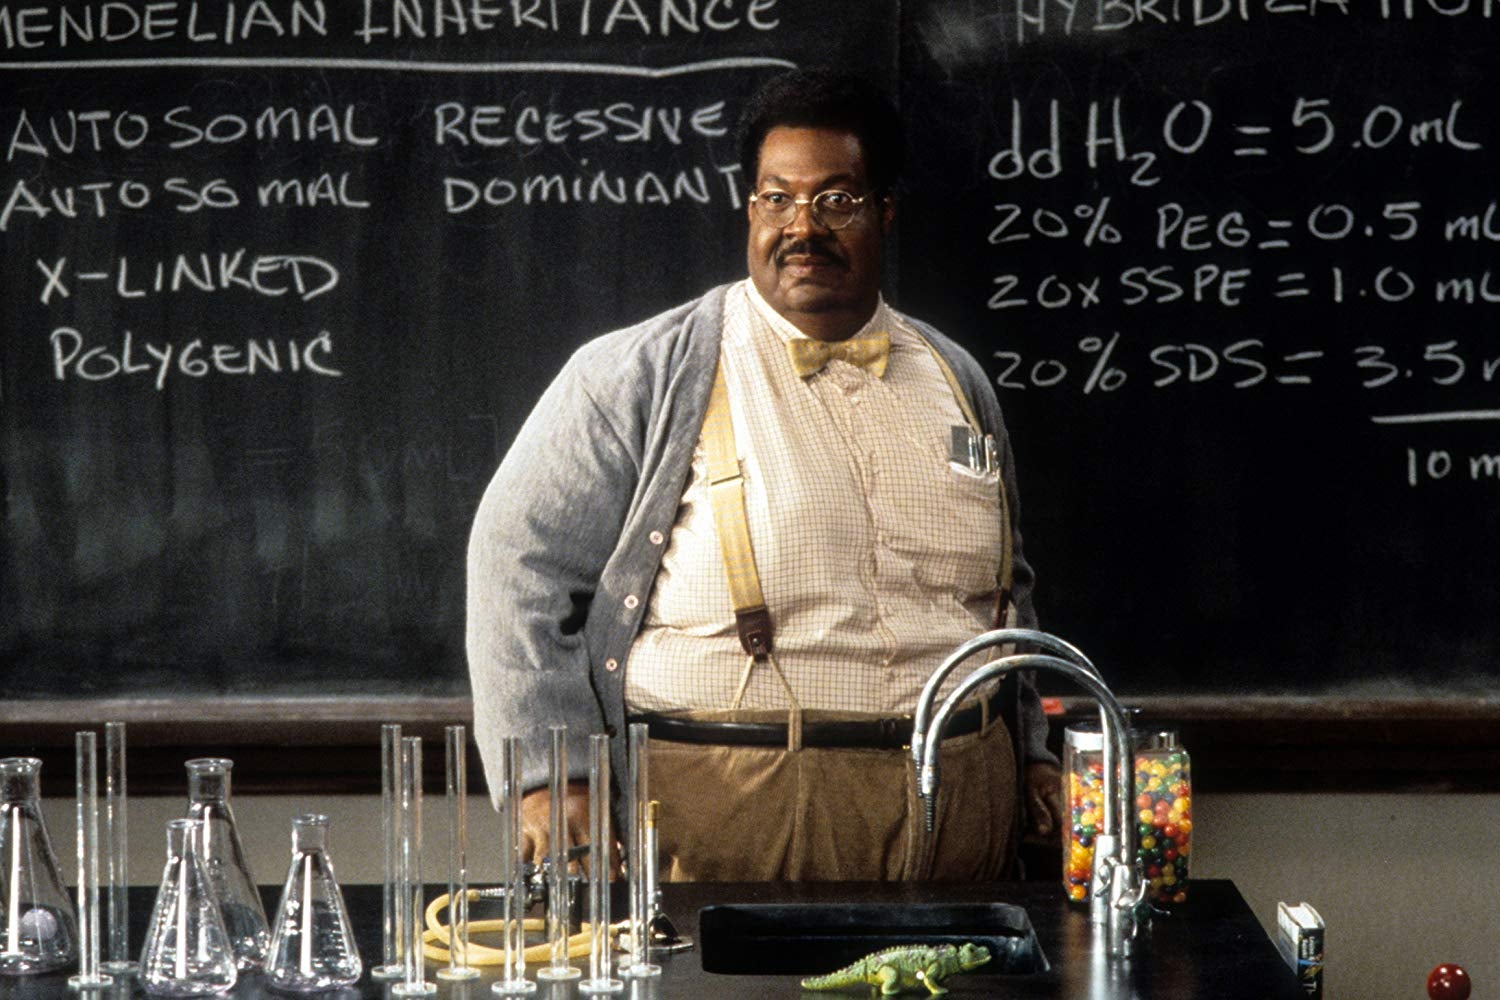 Eddie Murphy wears a fat suit and stands in front of a chalkboard with formulas written on it